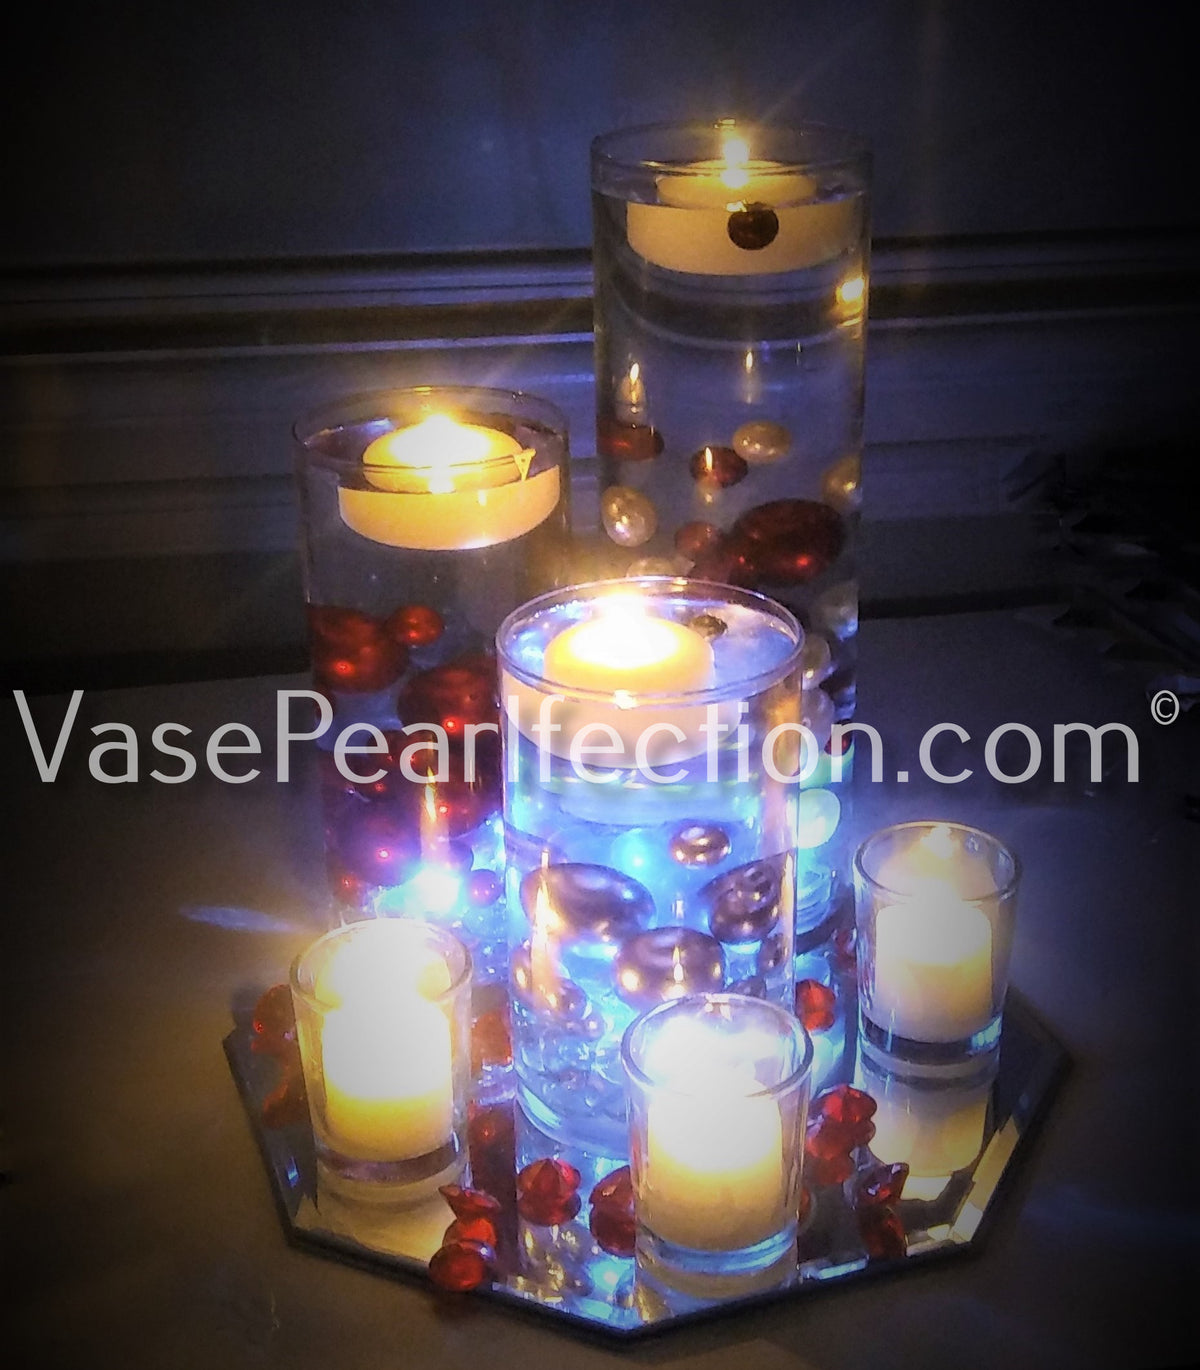 Red & White Pearls for Vase Decorations and Table Scatter – Floating Pearls